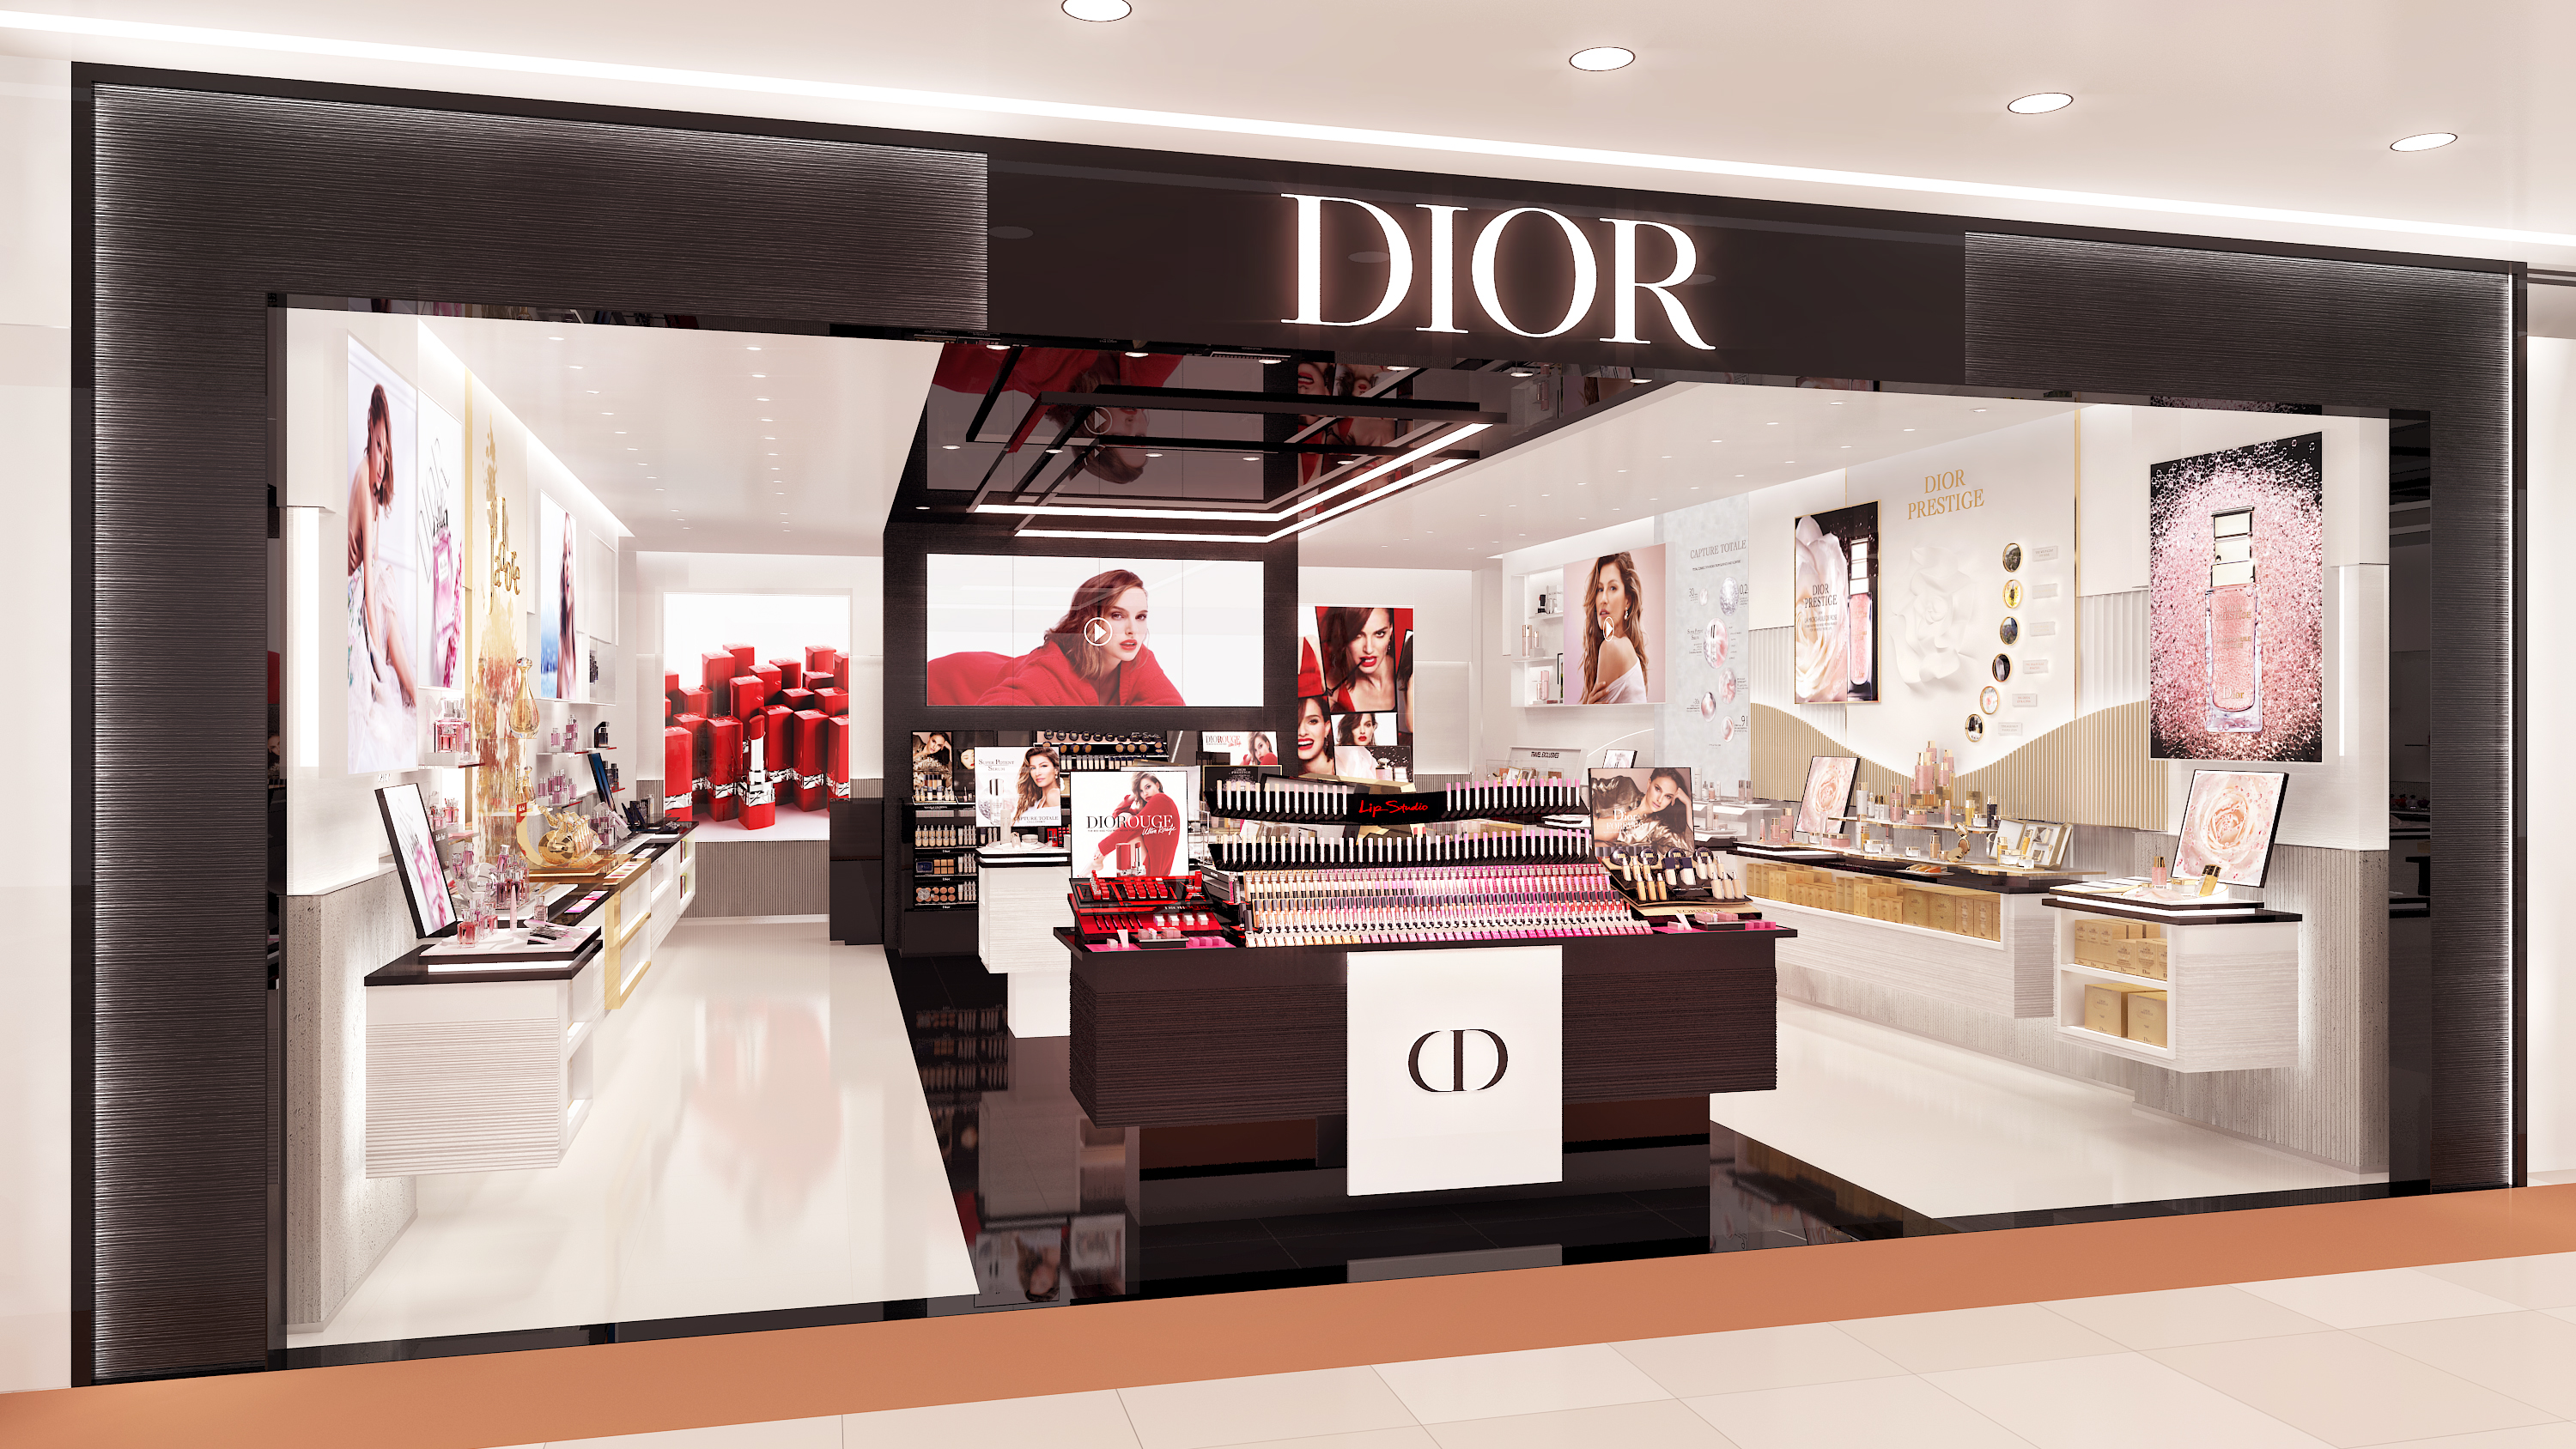 Dior Perfume and Beauty Southの店舗外観の写真